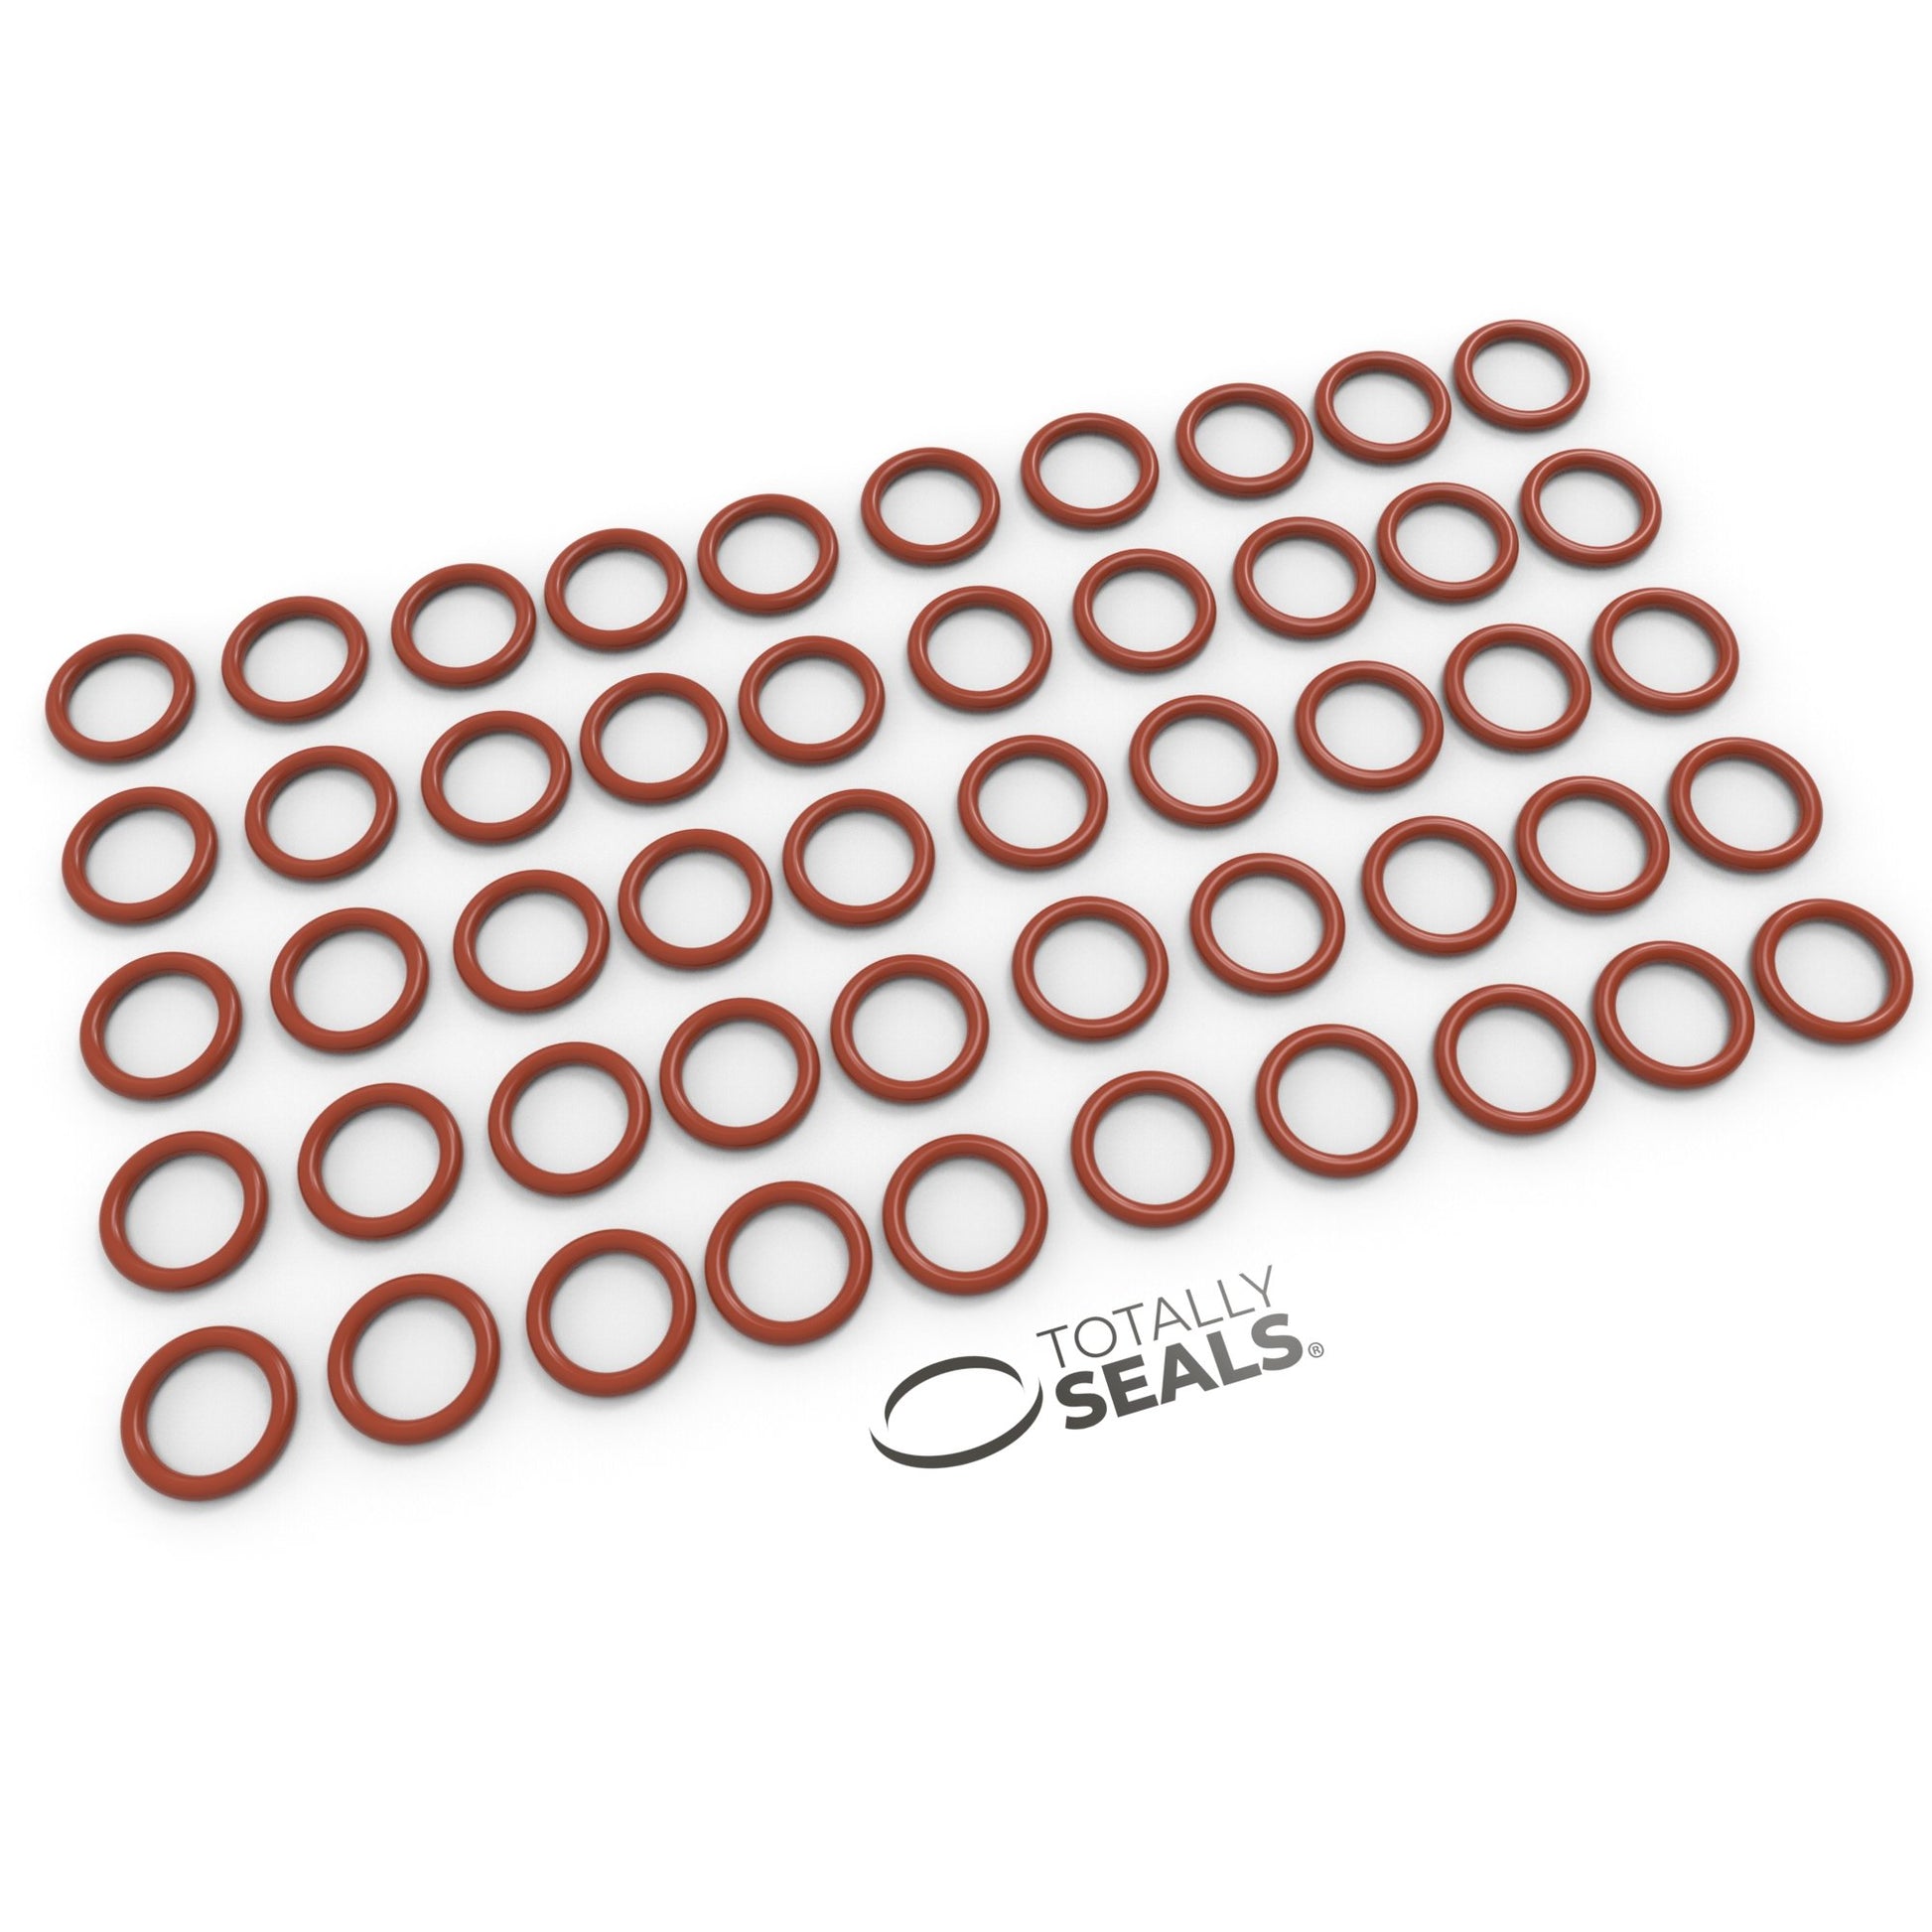 18mm x 3mm (24mm OD) Silicone O-Rings - Totally Seals®